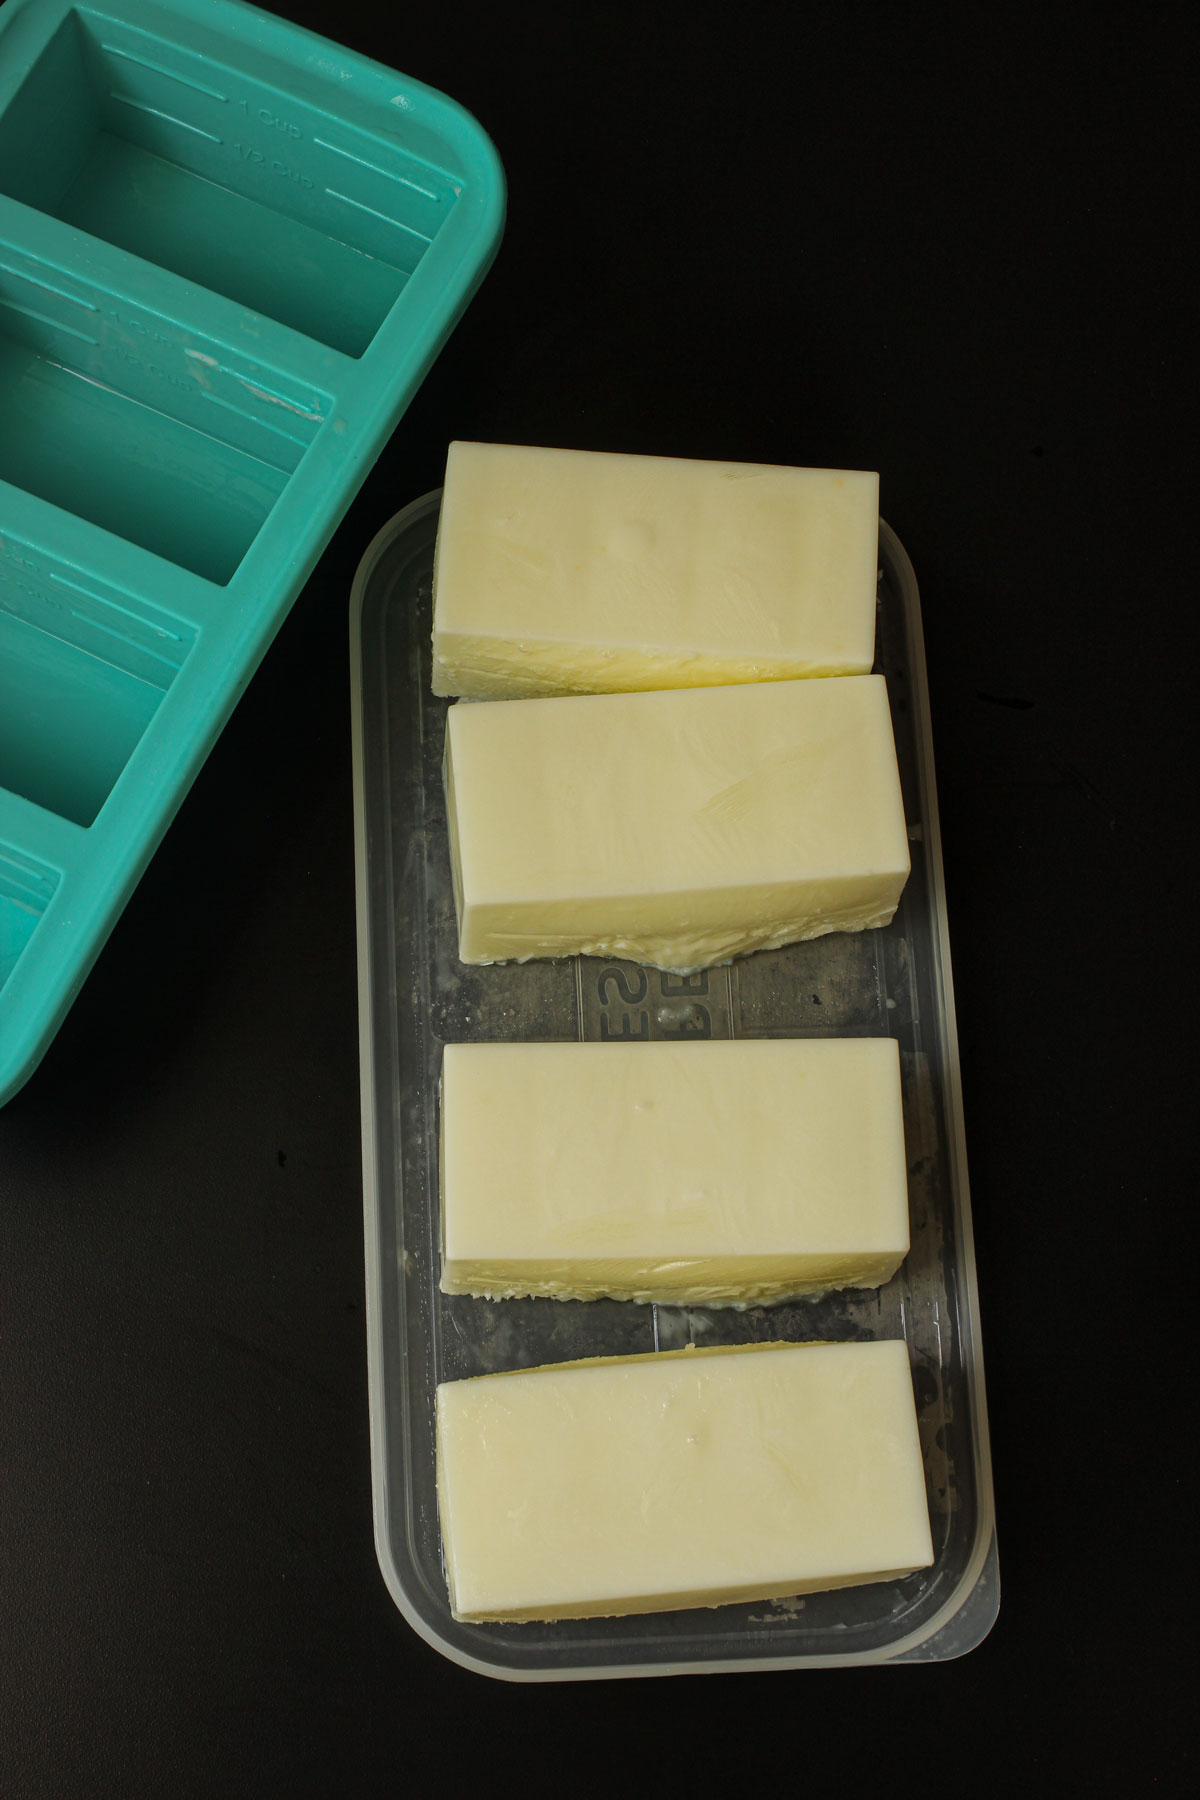 one-cup bricks of buttermilk on the soupercube lid next to the soupercube mold.